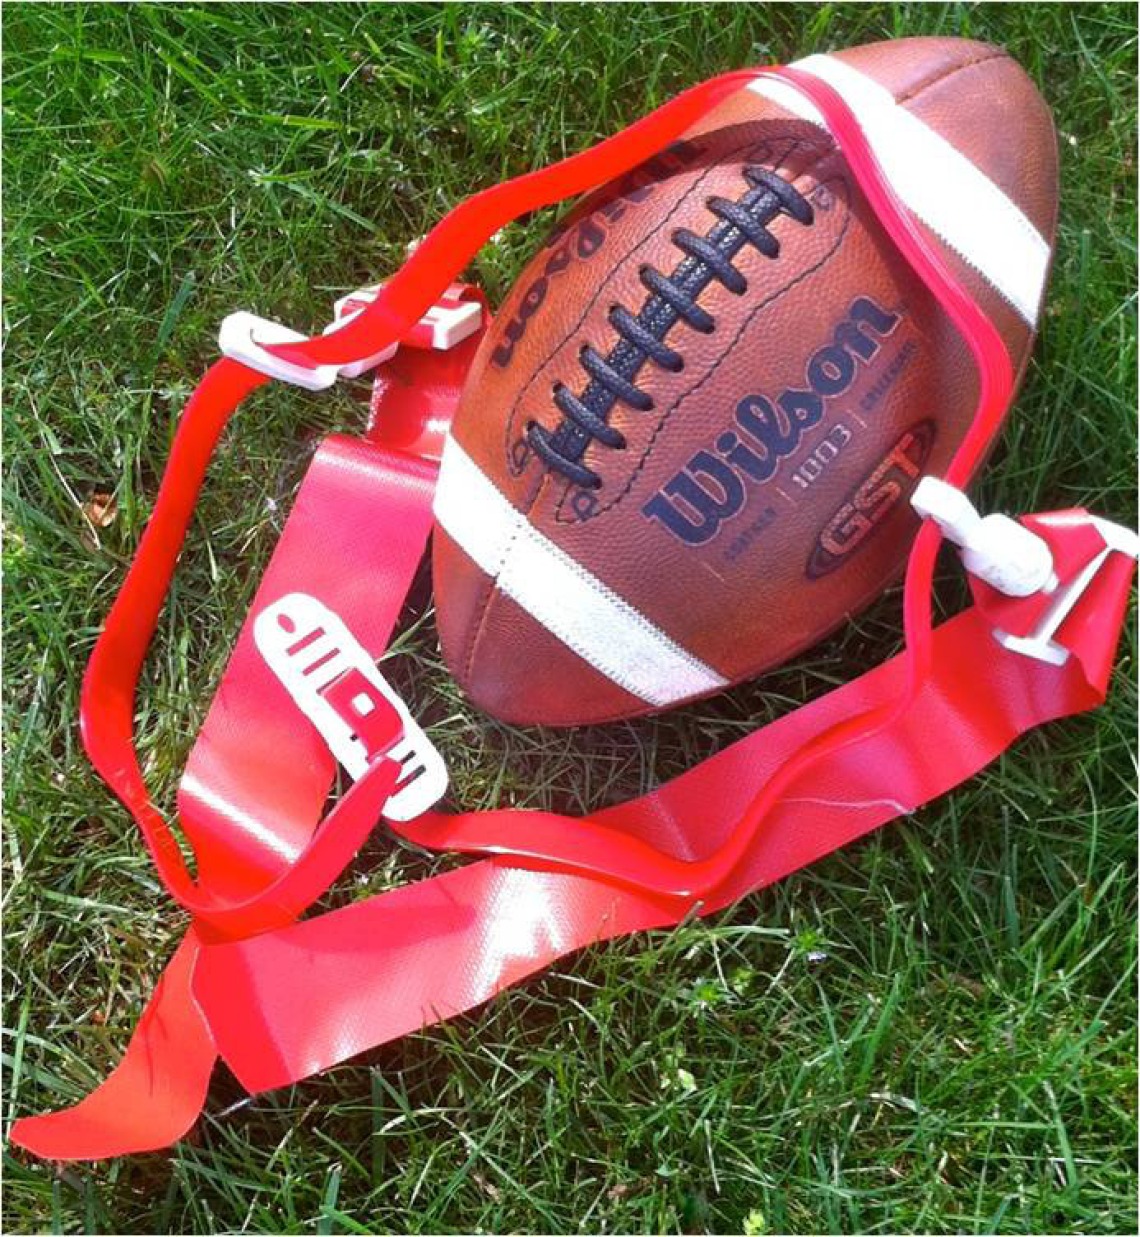 Football sitting on grass with flag football flags